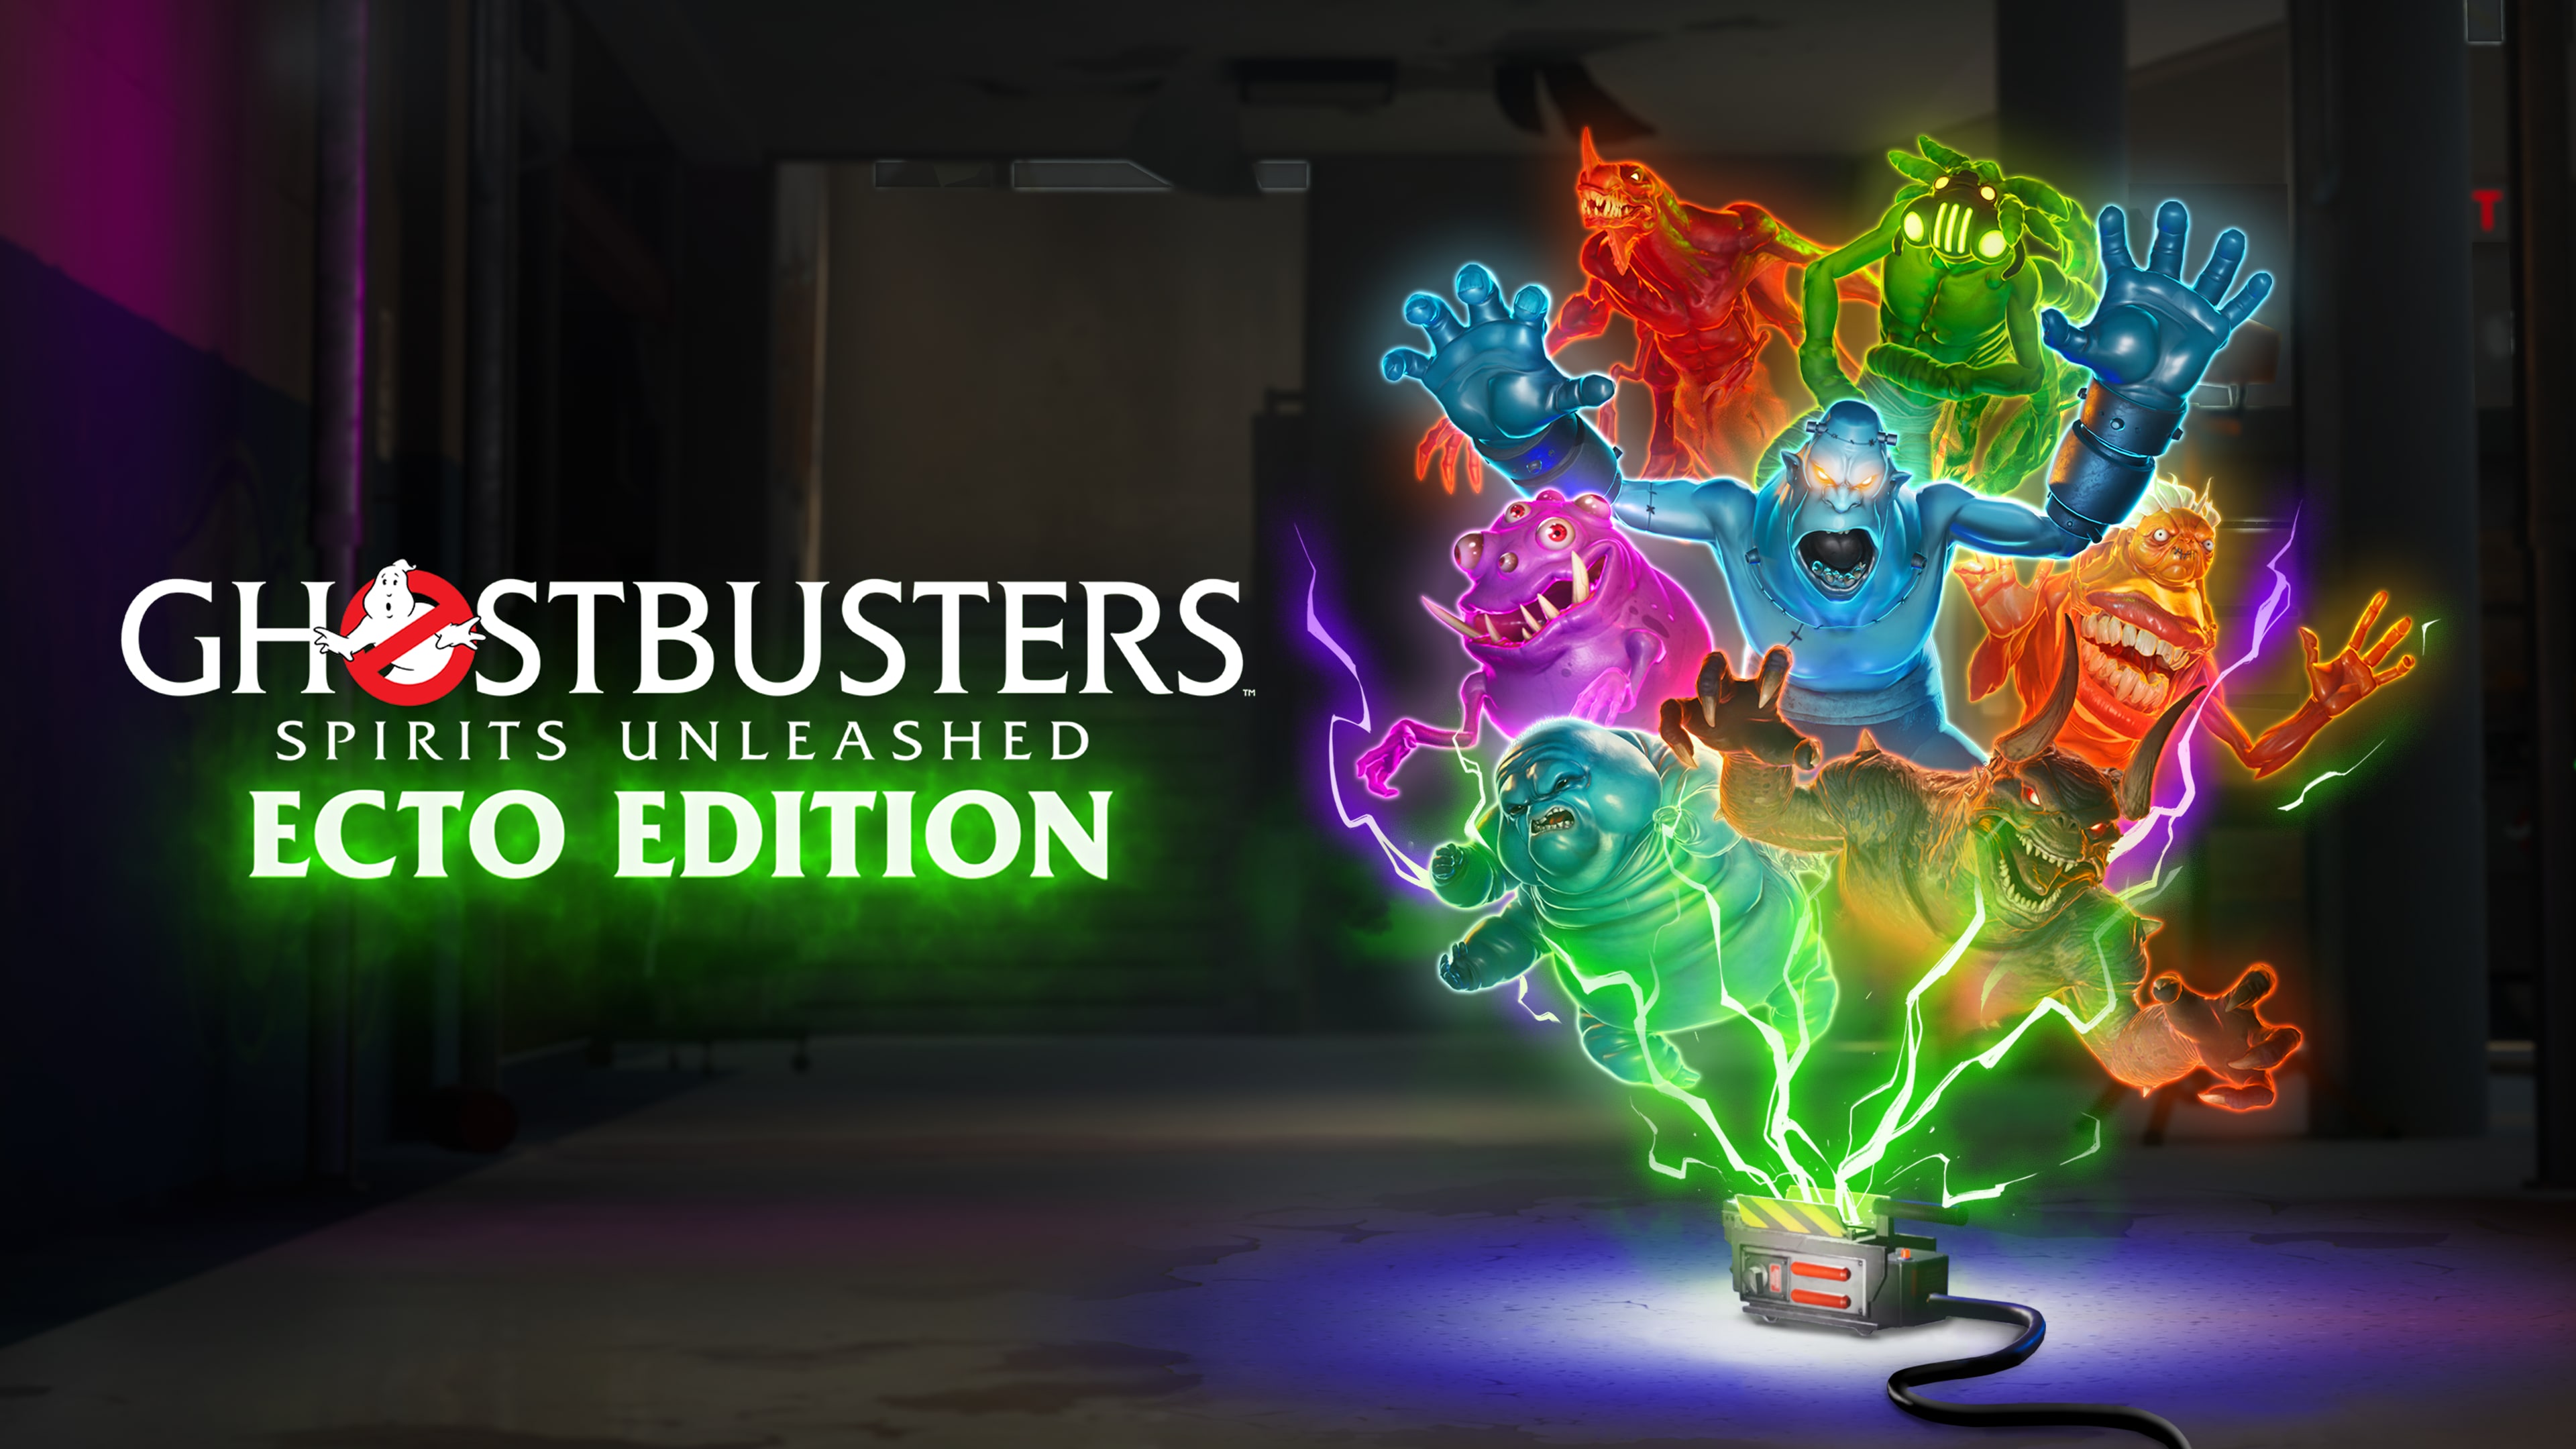 Ghostbusters: Spirits Unleashed Ecto Edition (日语, 韩语, 繁体中文, 英语)